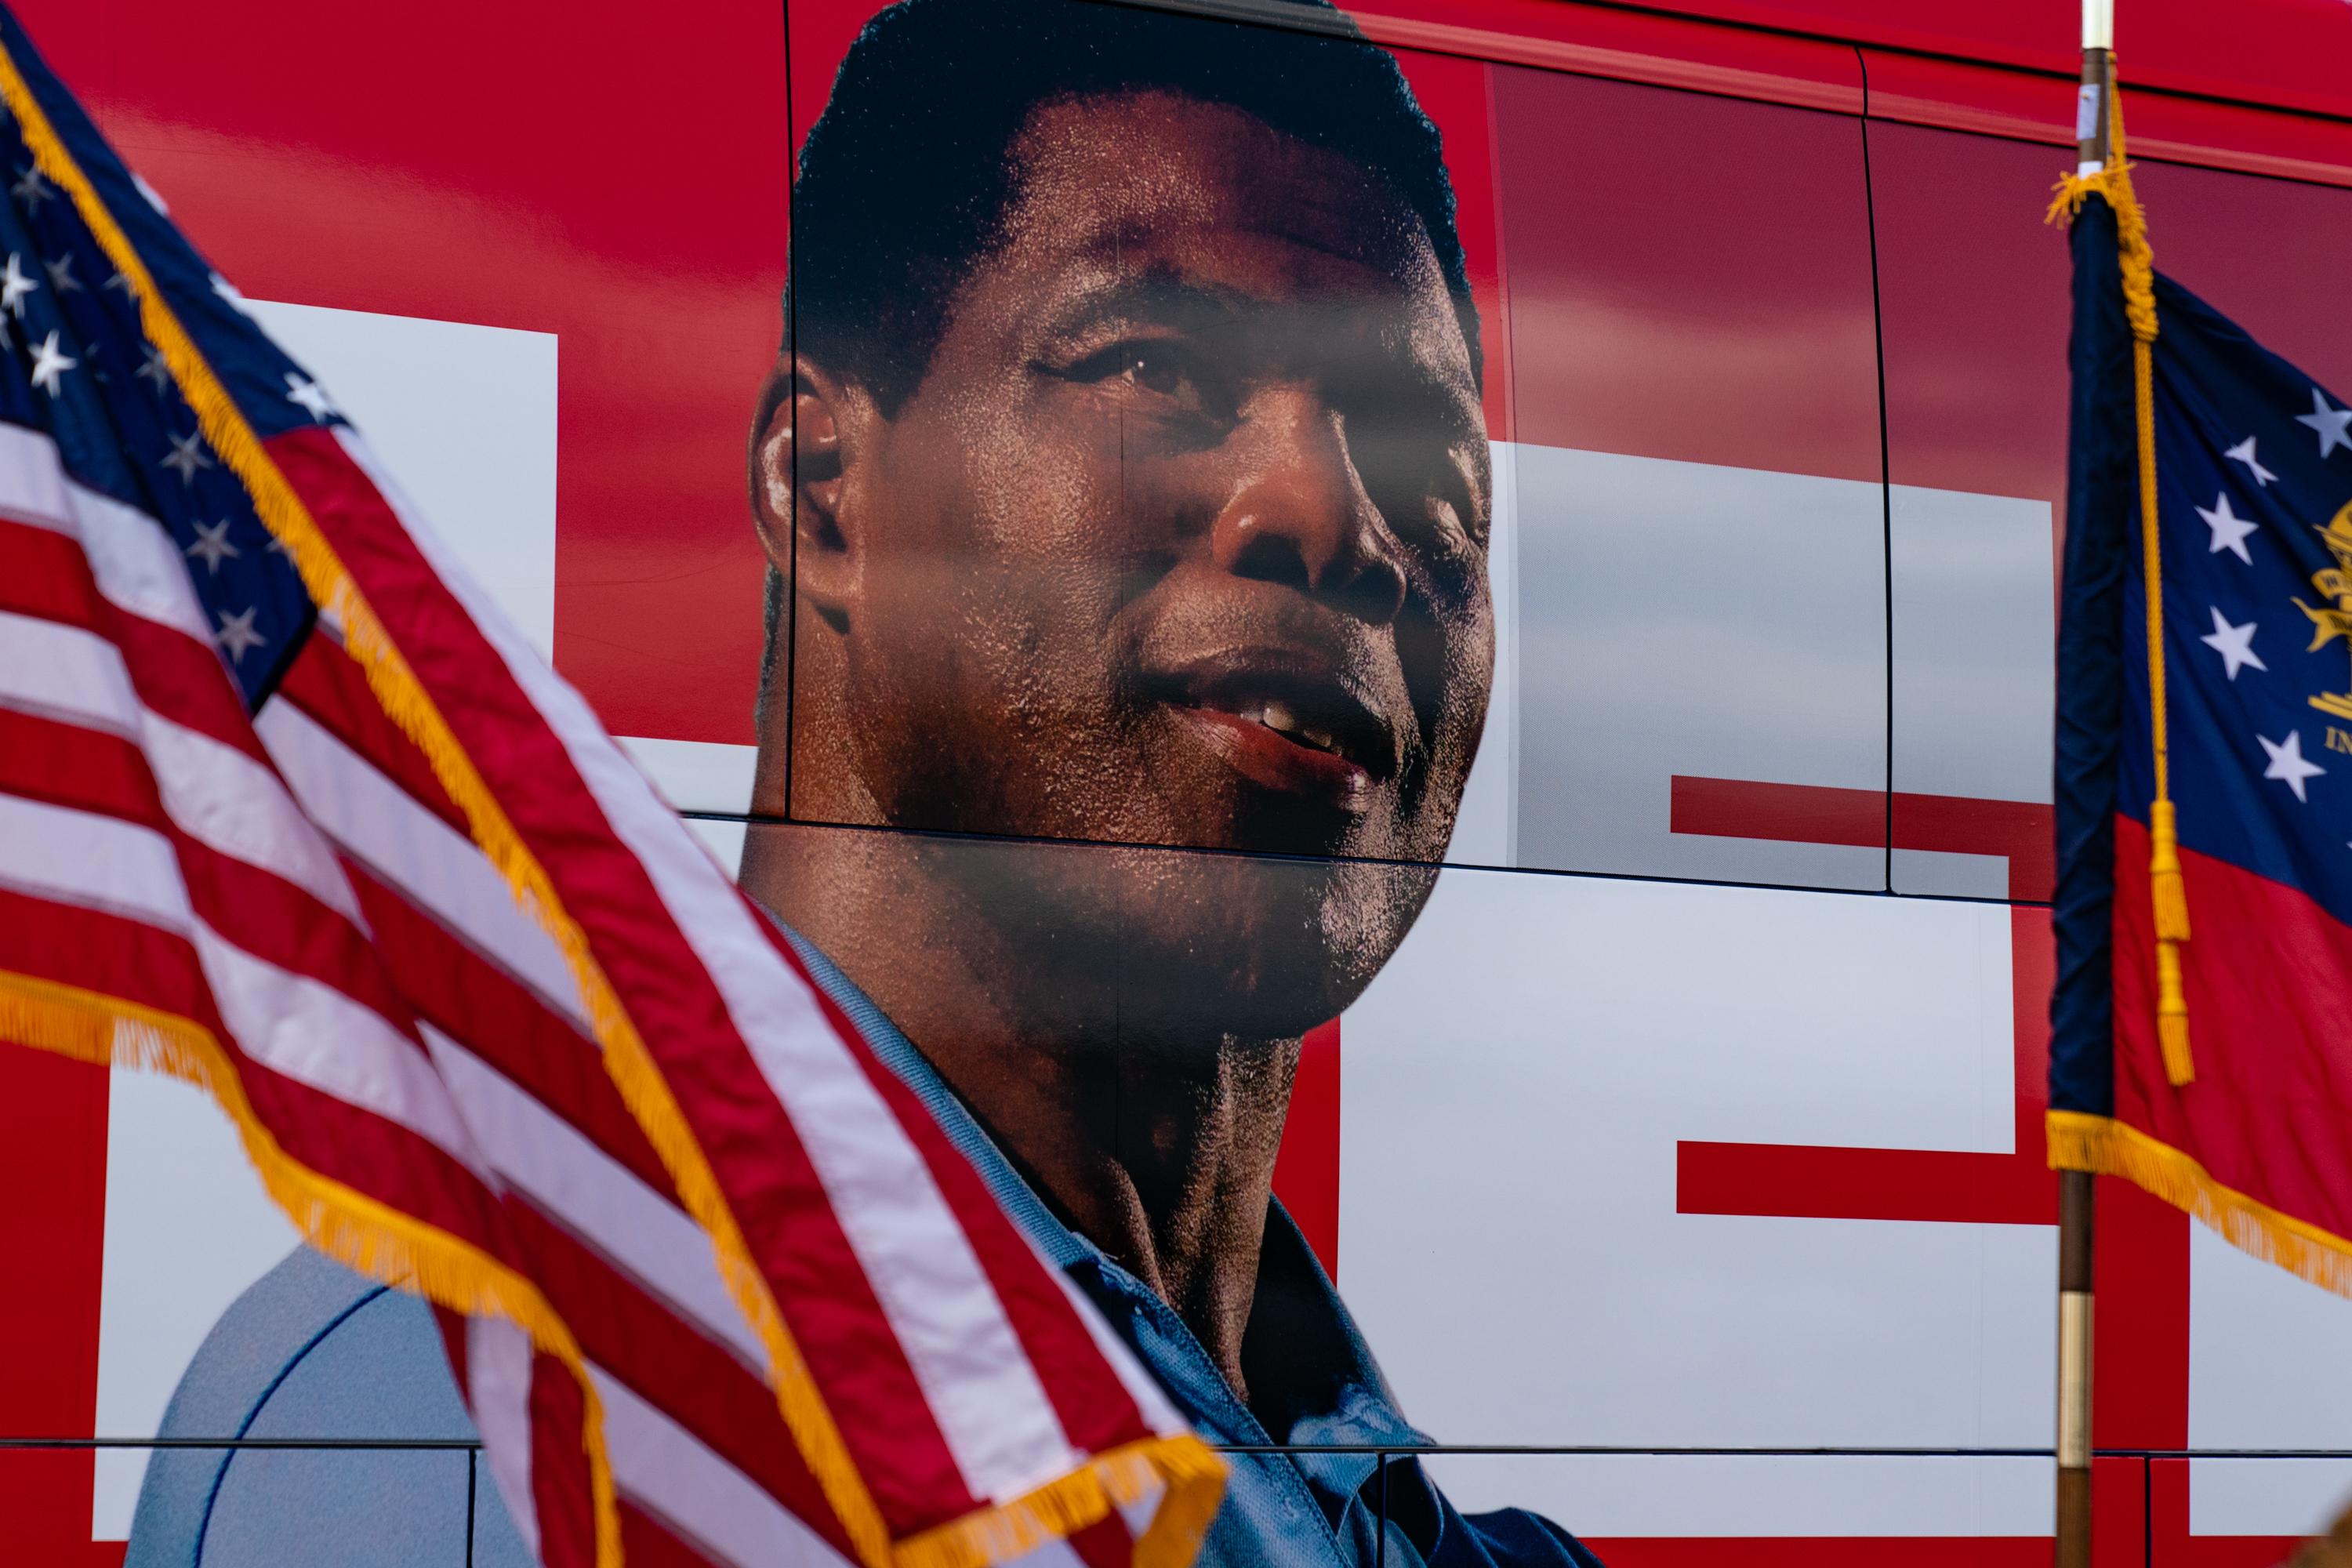 U.S. and Georgia state flags fly in front of the Herschel Walker campaign bus, which has a huge replication of his face displayed on one side.